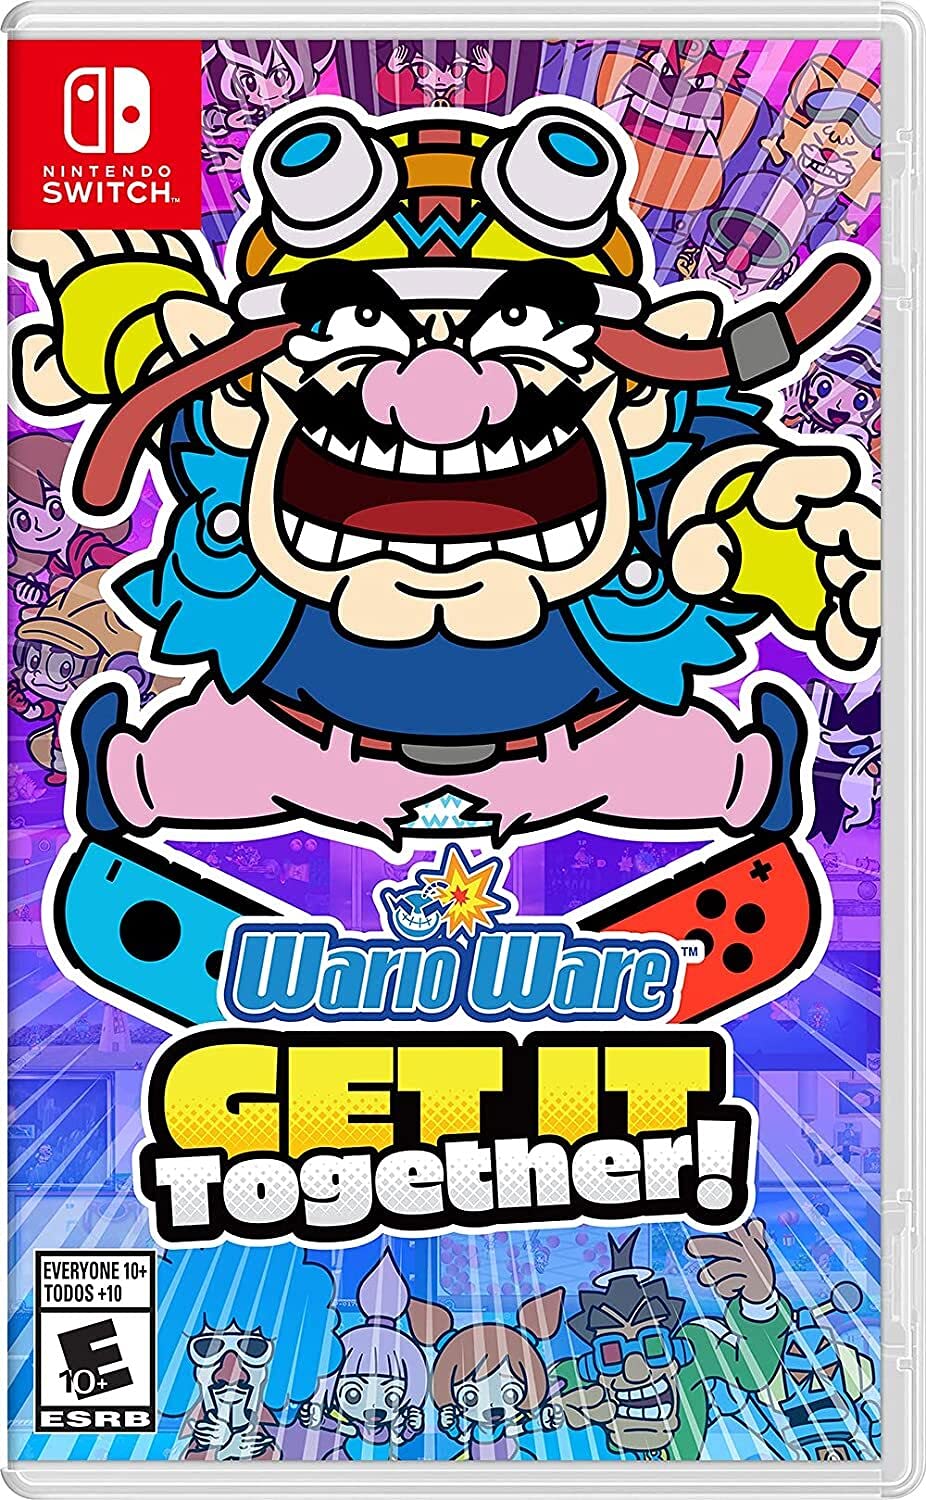 WarioWare: Get it Together! for Nintendo Switch cover art.